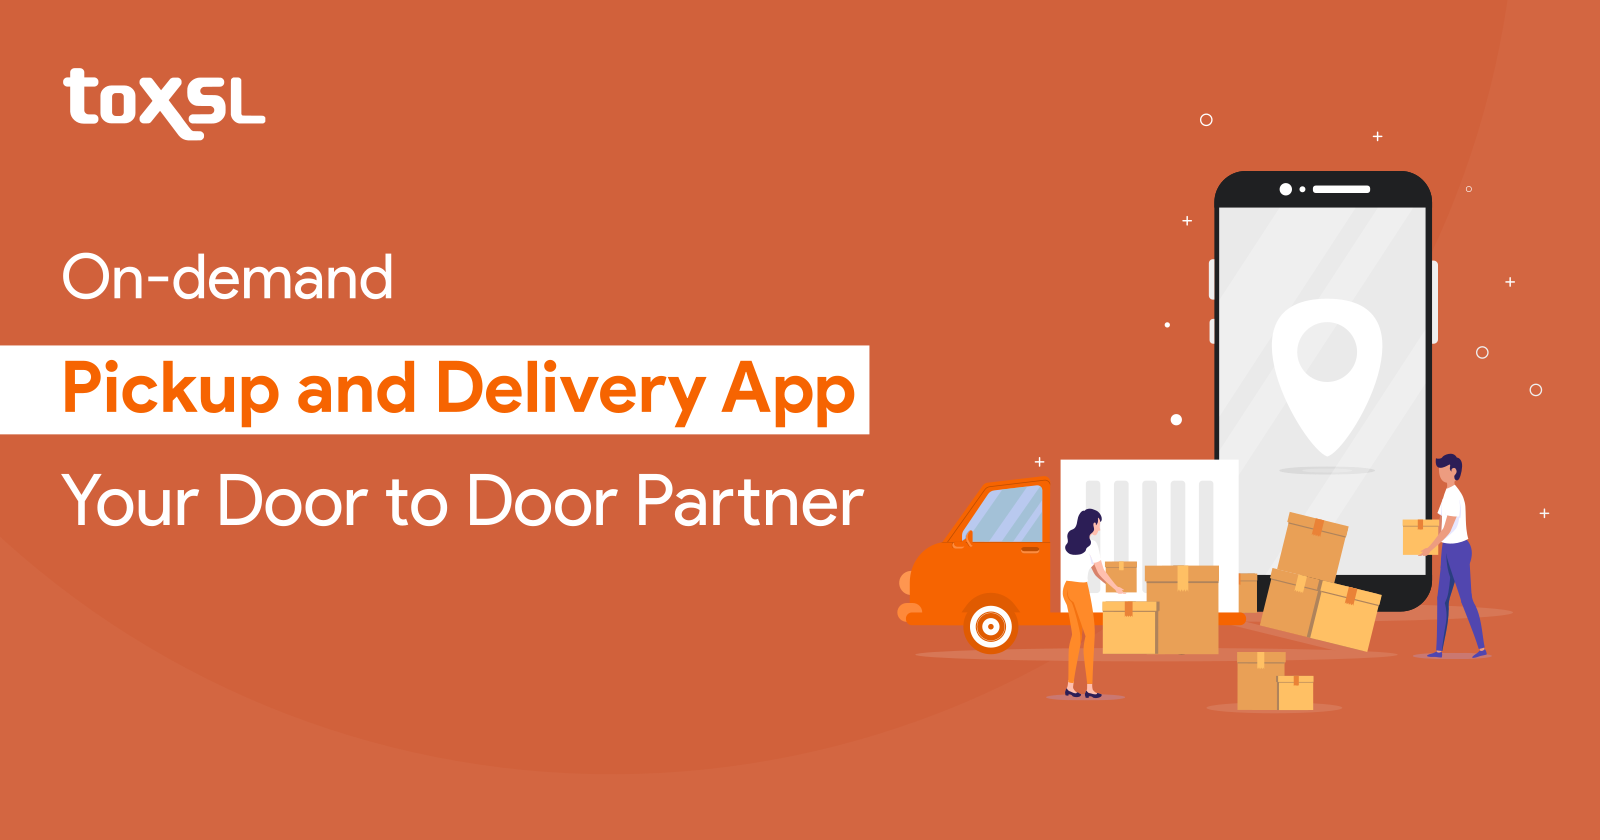 Everything You Need to Know About On-demand Pickup and Delivery App